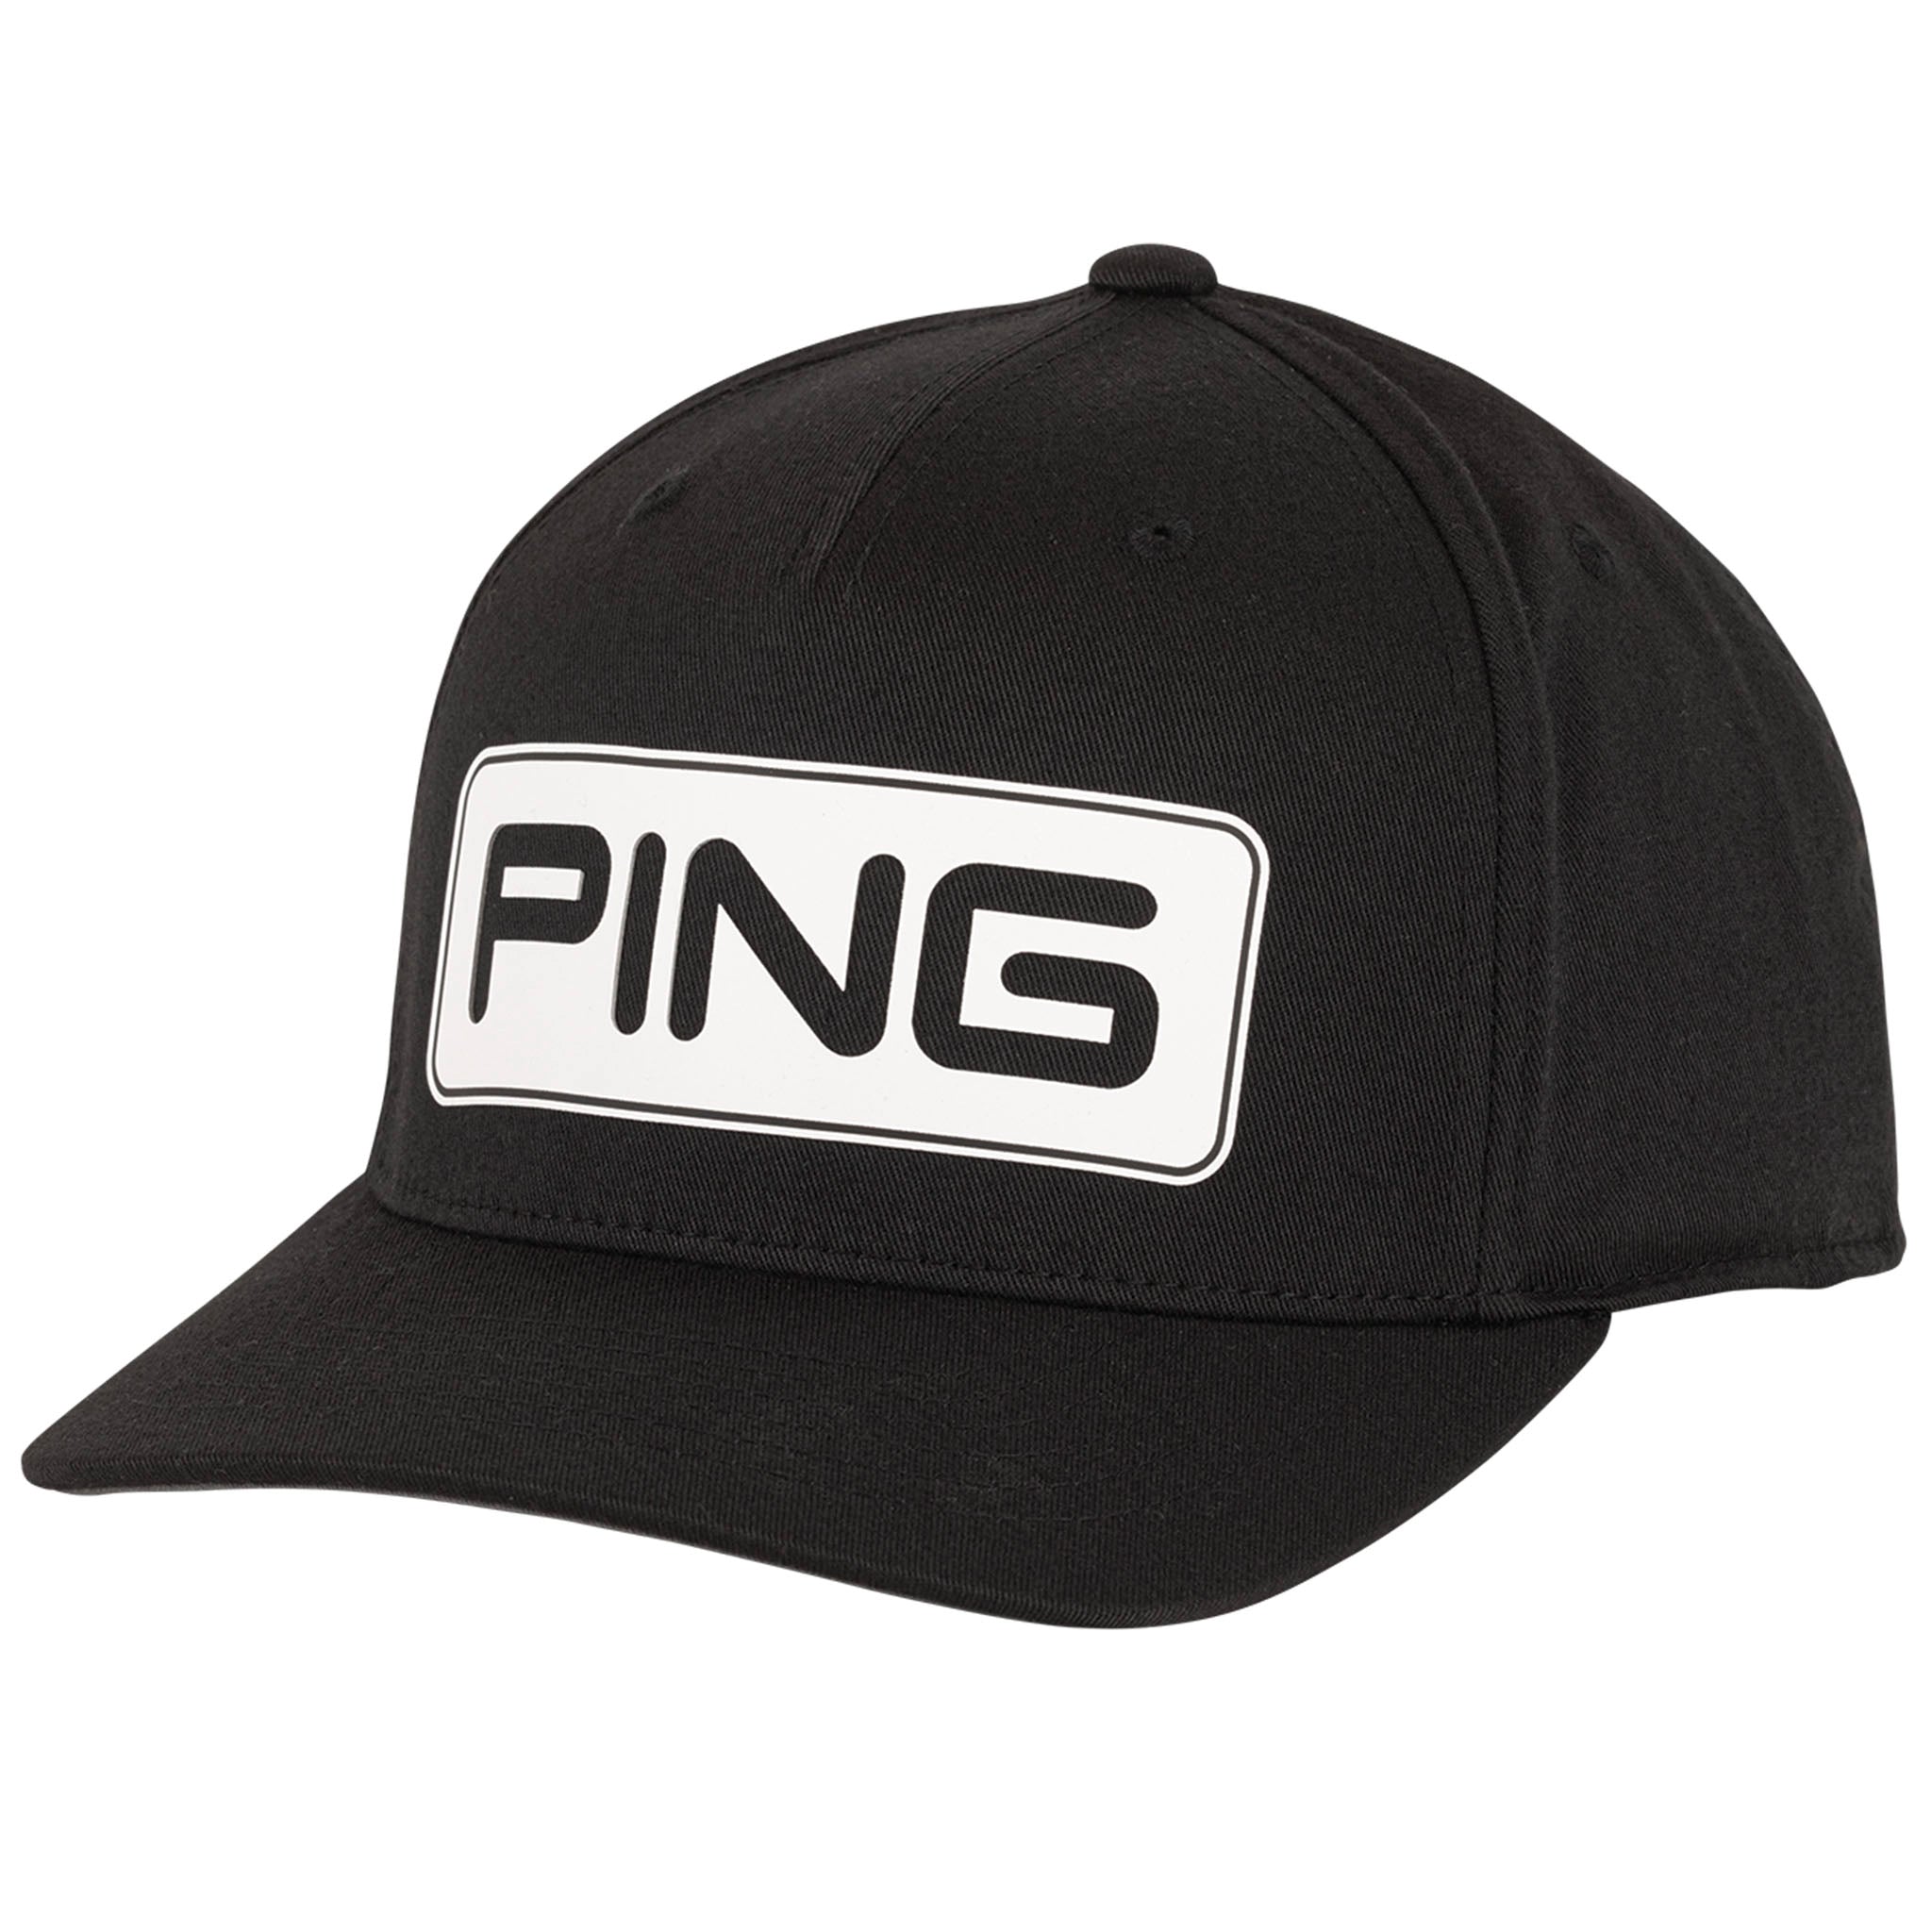 Golf Golf — The House Caps Mens of